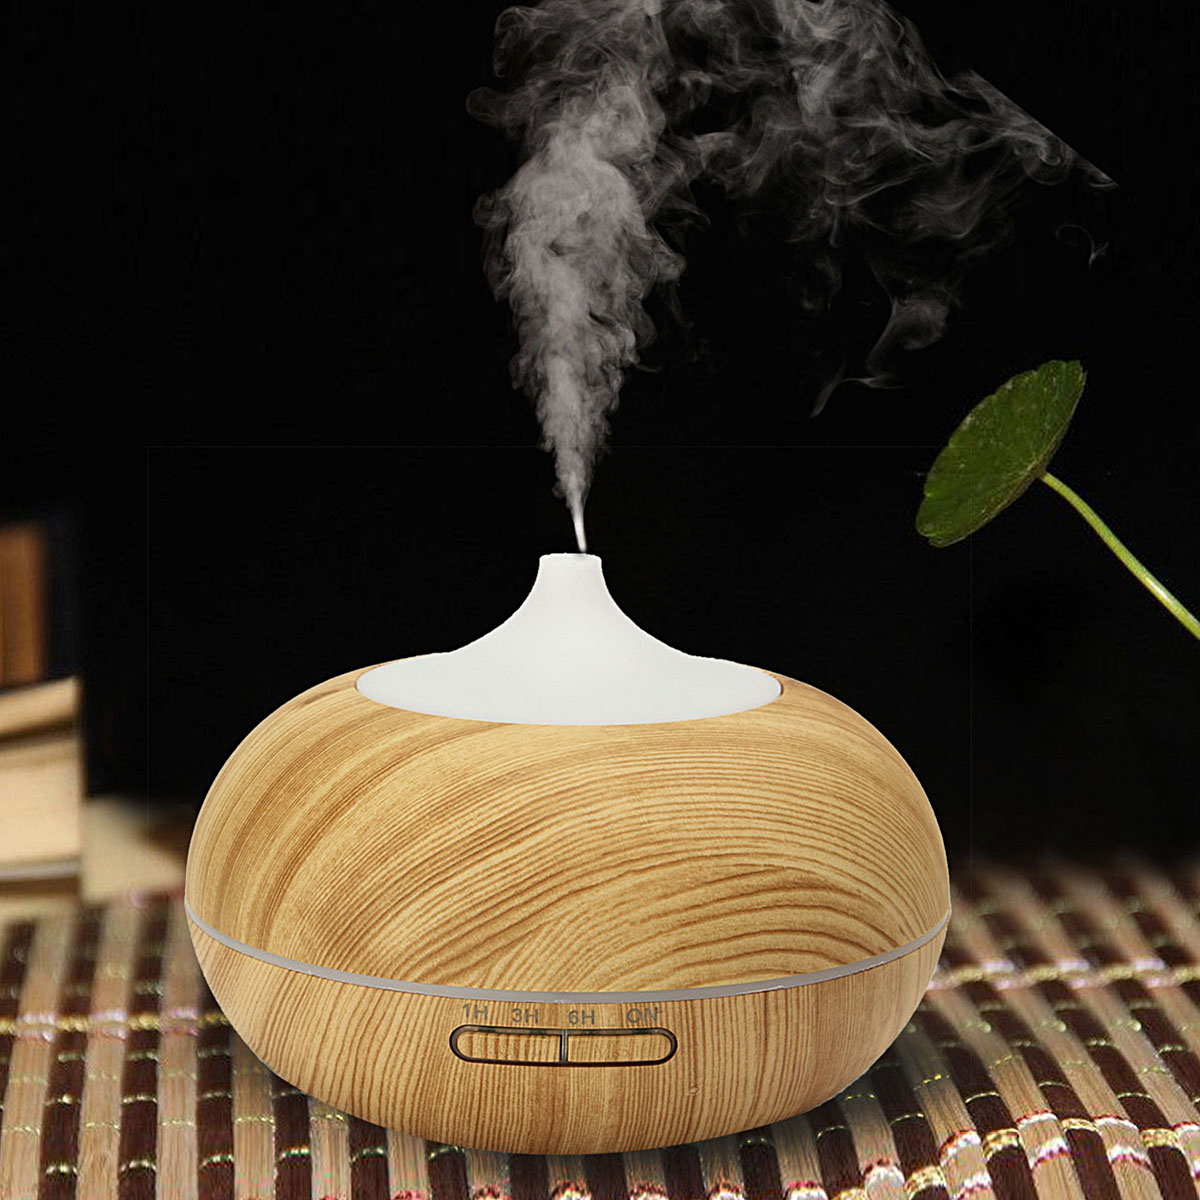 300ml-Color-changing-LED-Ultrasonic-Humidifier-Essential-Oil-Diffuser-Aroma-Spray-Aromatherapy-Air-P-1095703